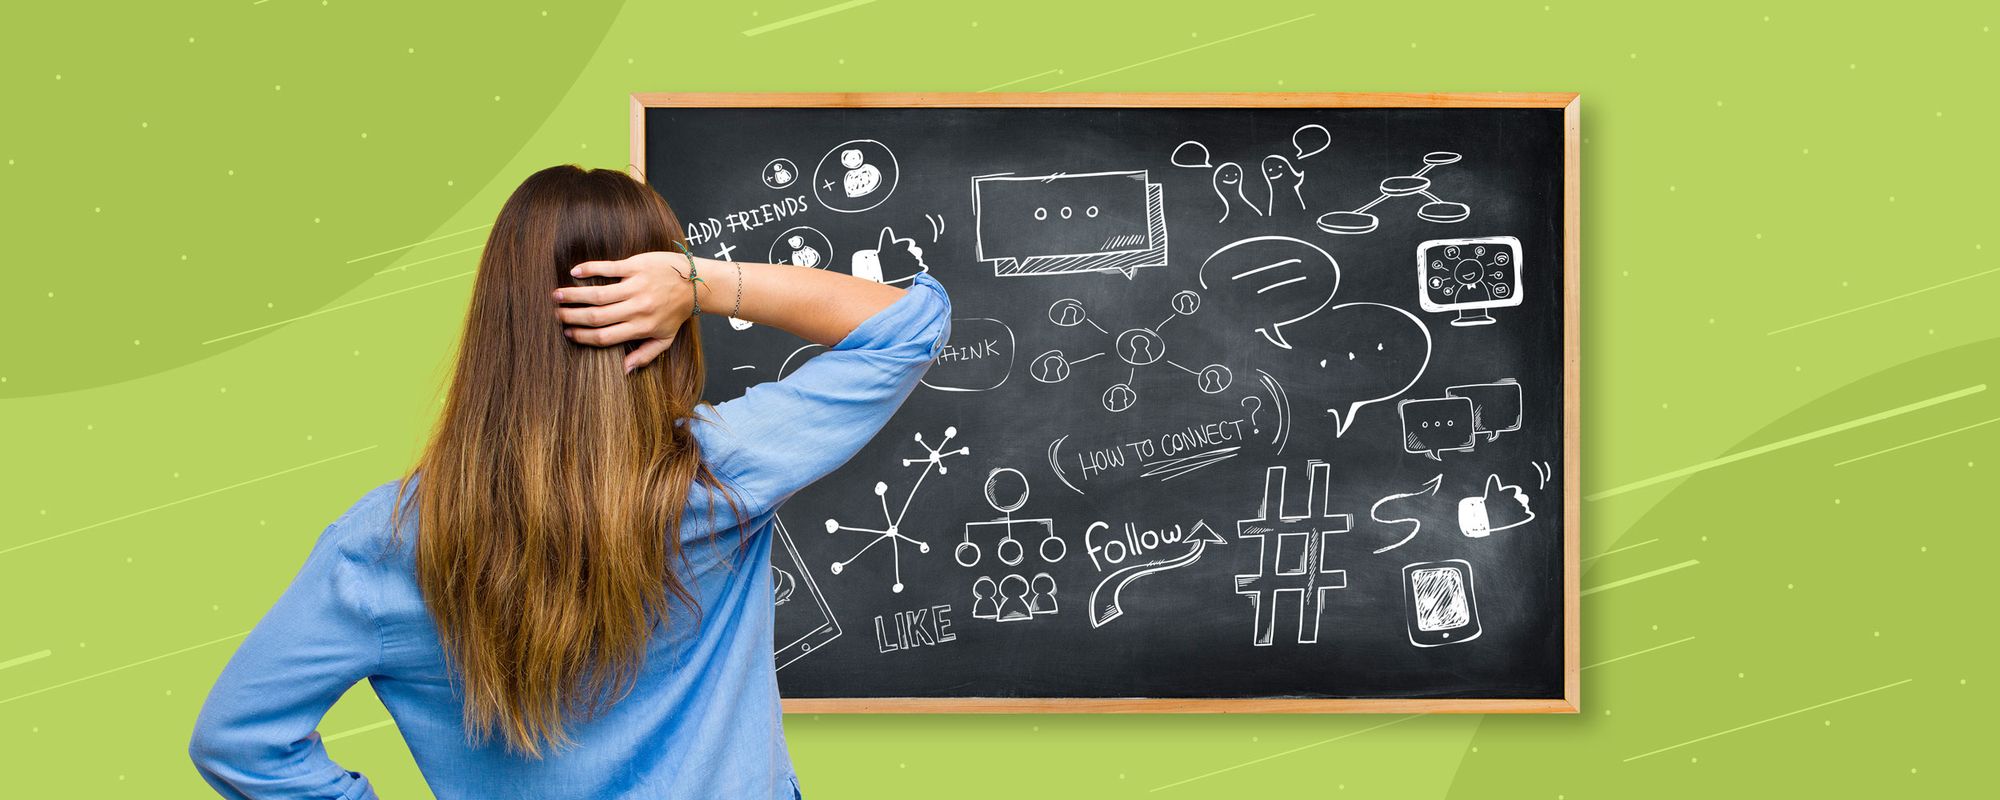 Creator plotting out on a chalkboard how to get to 1,000 TikTok followers.